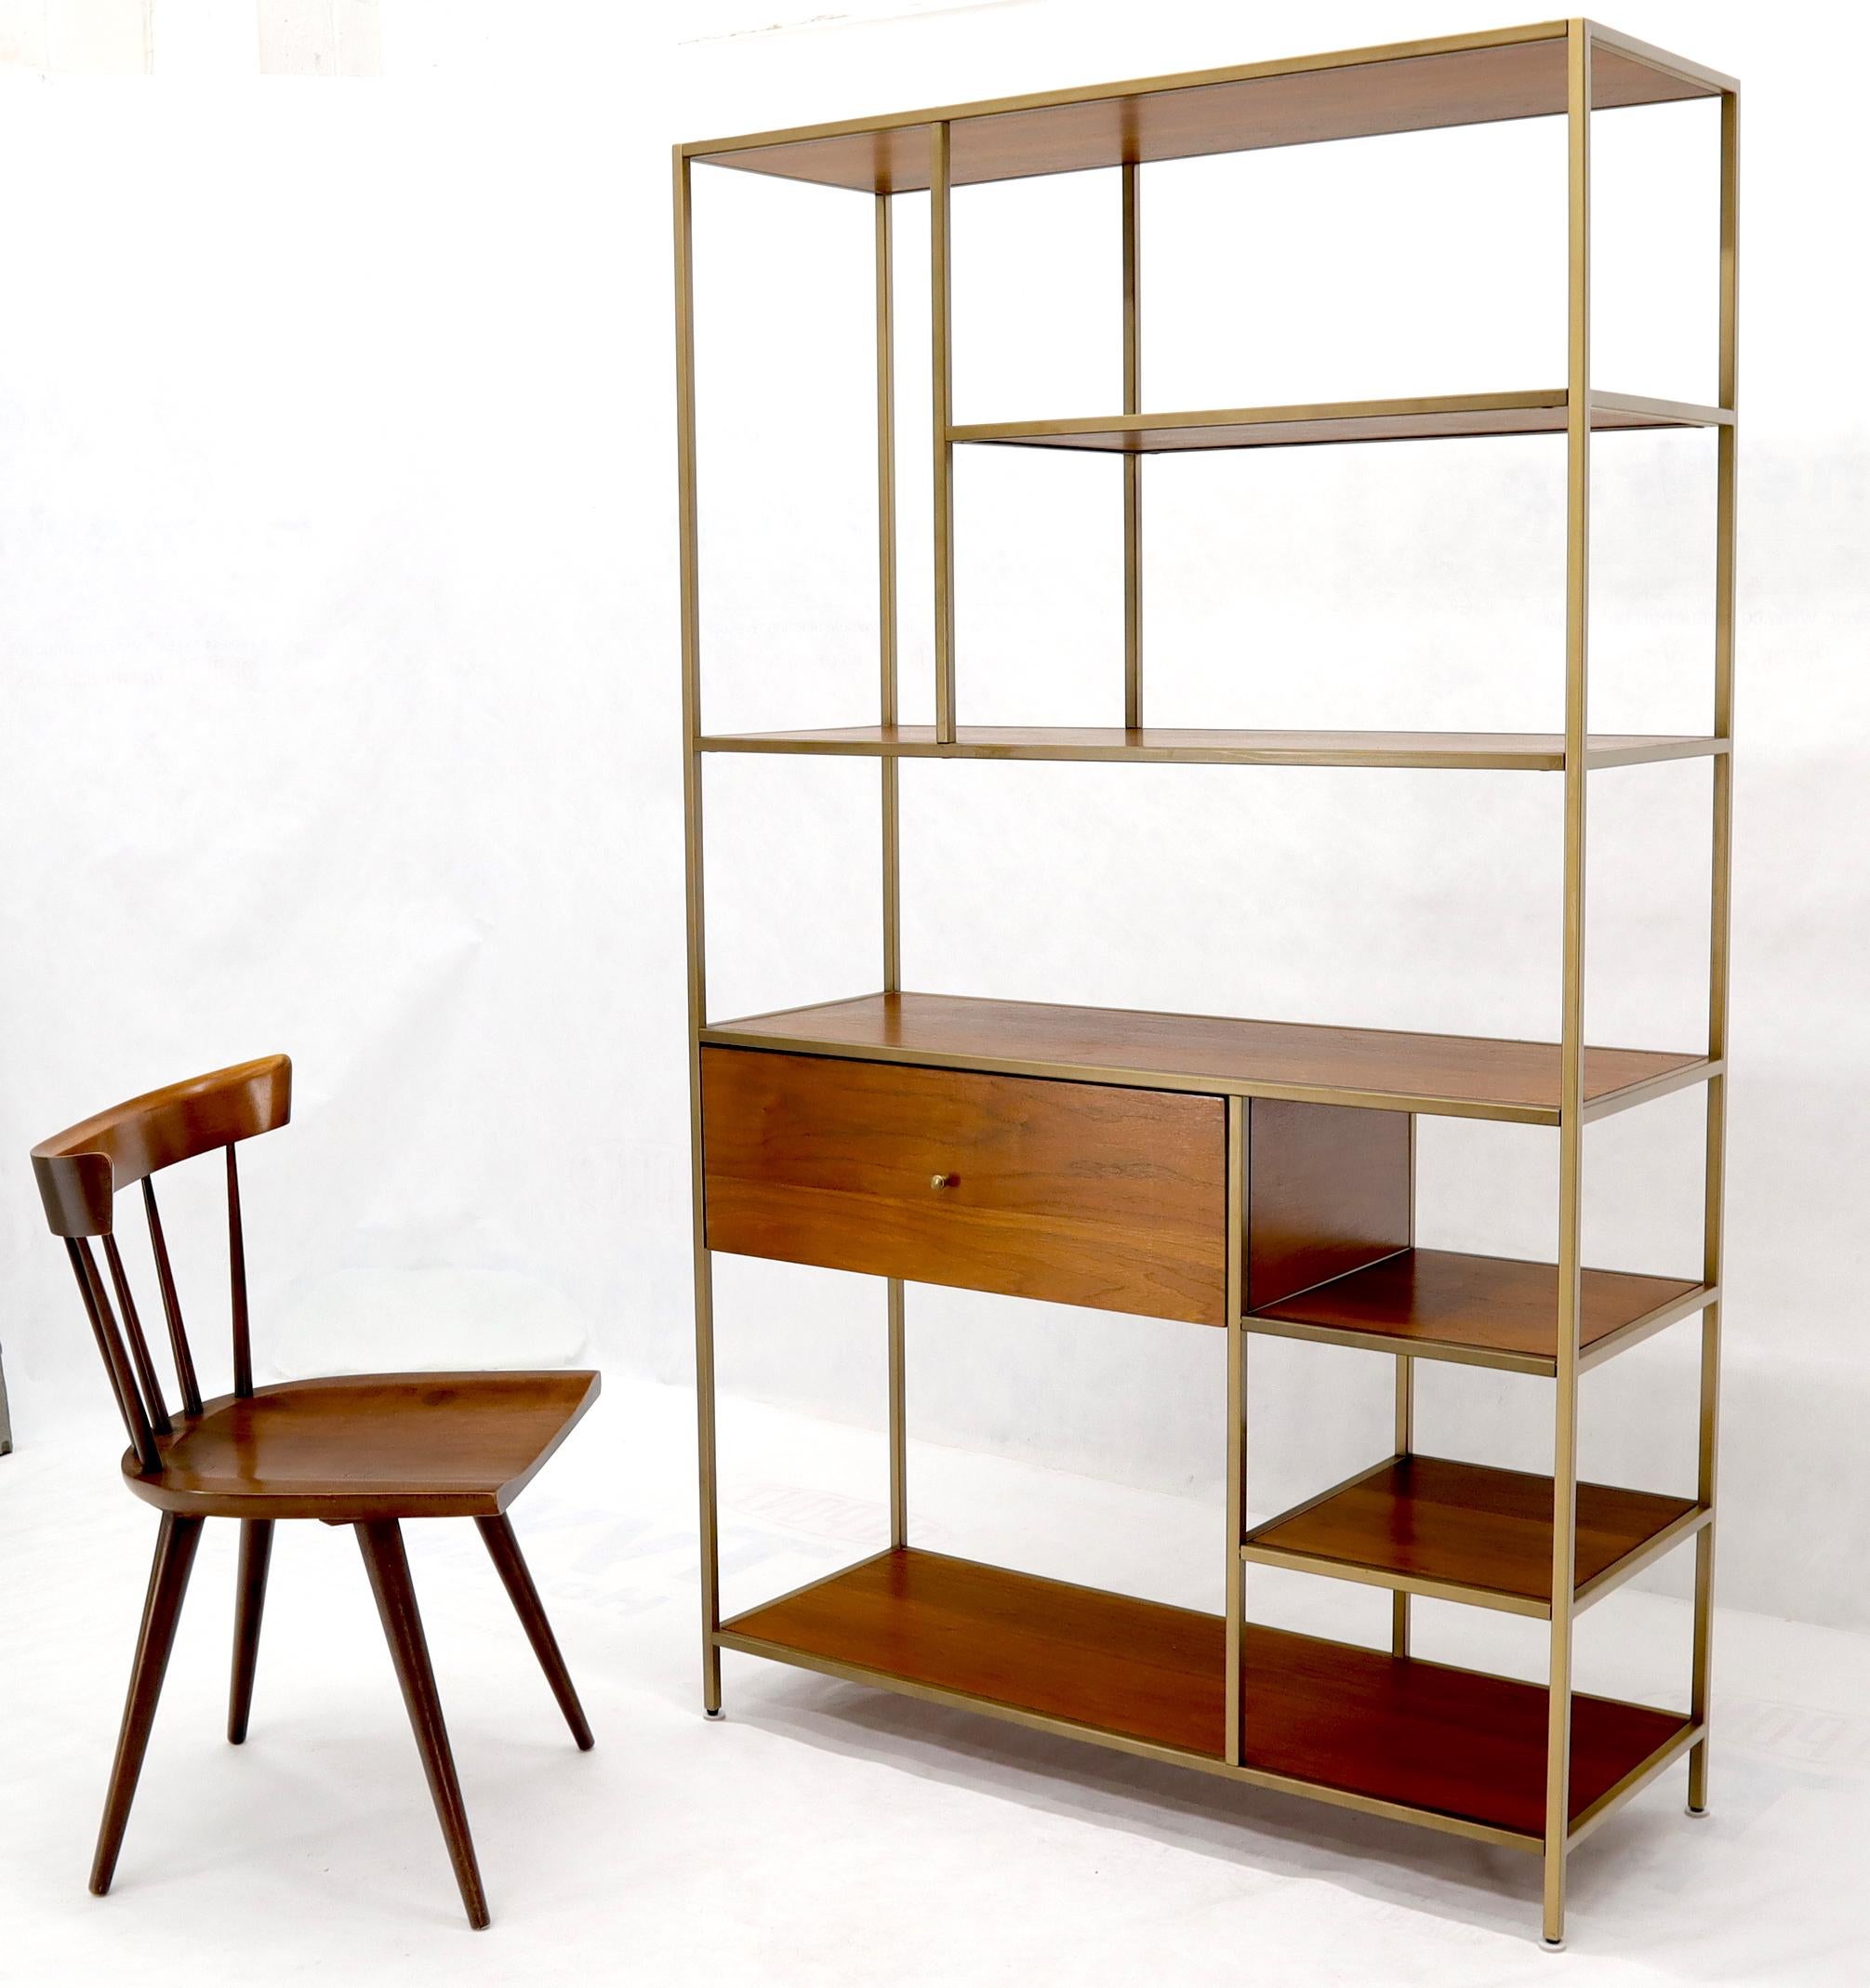 Mid-Century Modern style walnut and brass staggered étagère shelving unit. One deep drawer compartment.